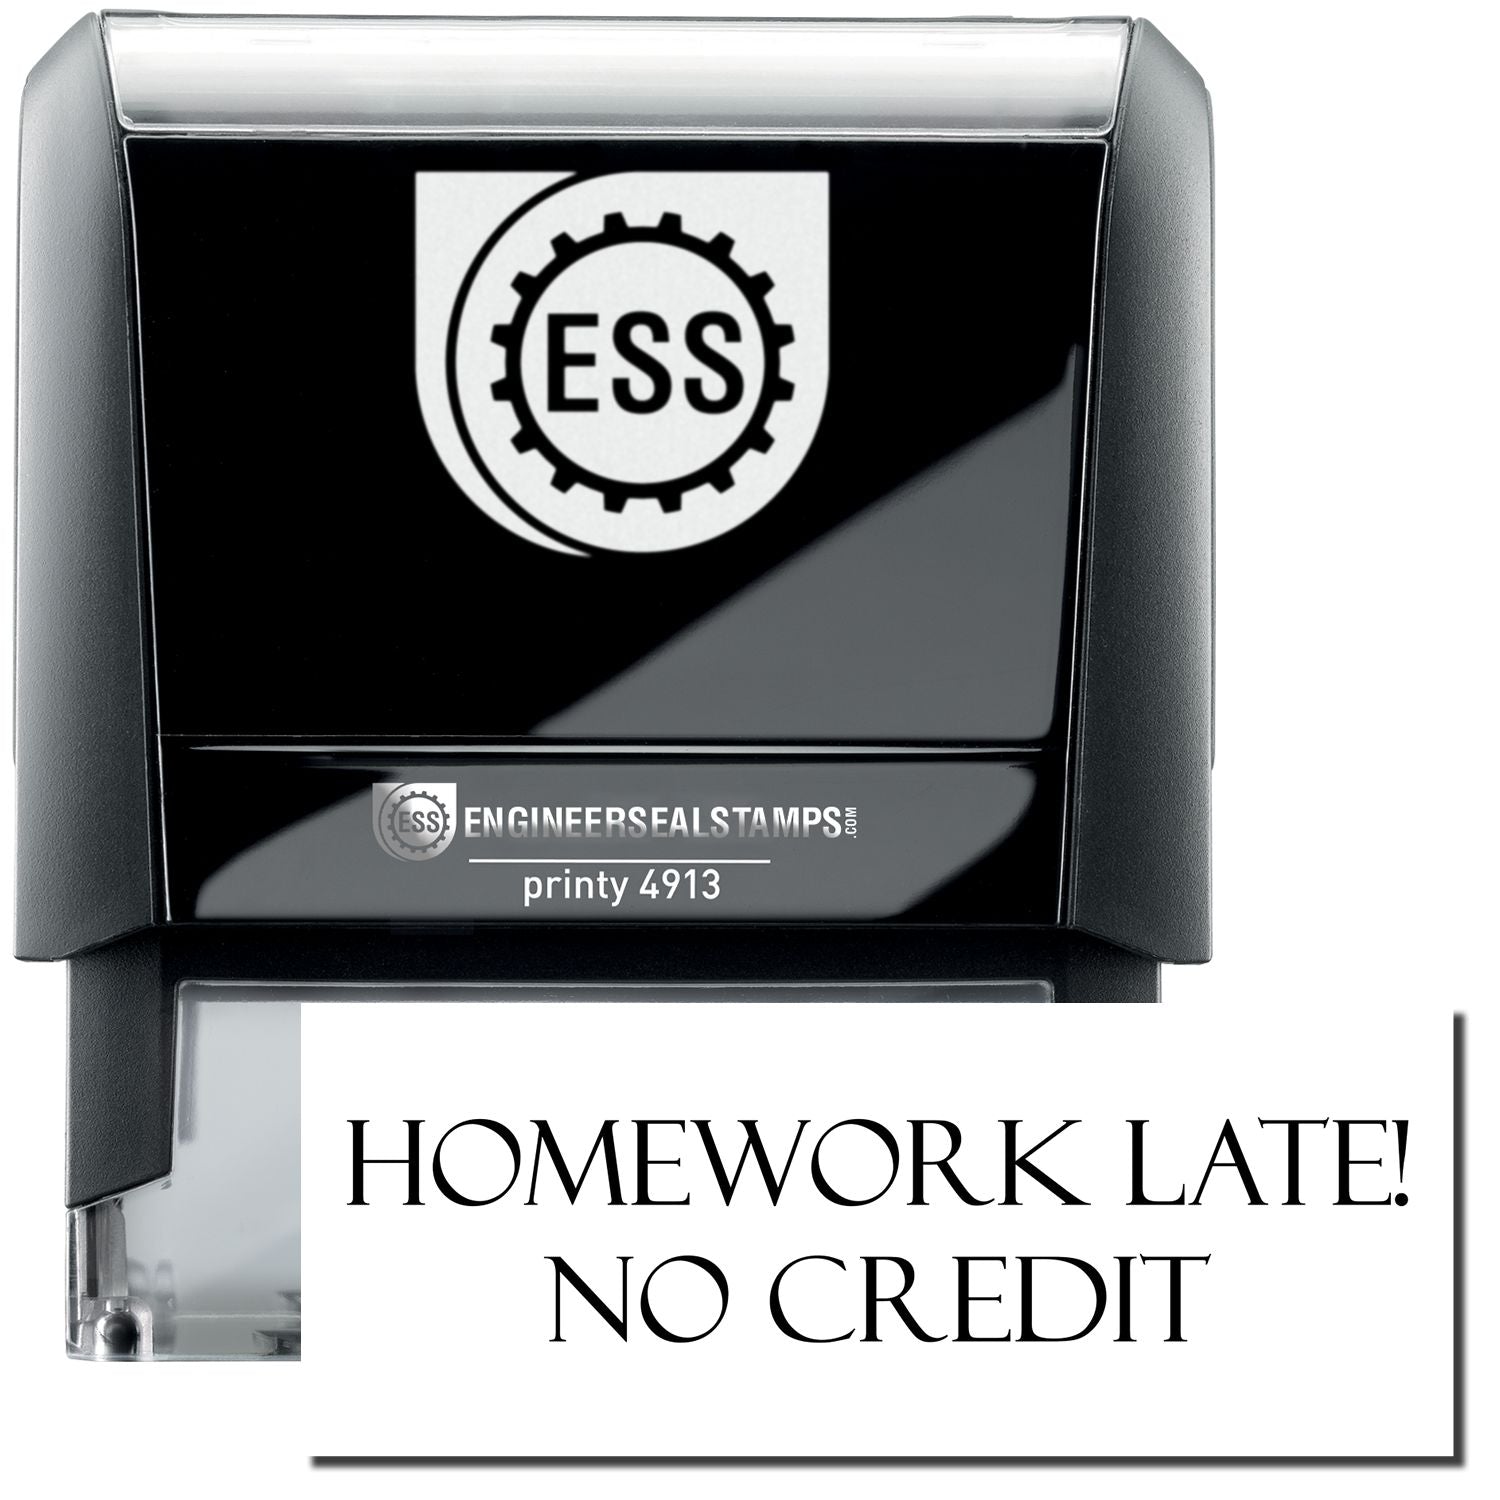 A self-inking stamp with a stamped image showing how the text "HOMEWORK LATE! NO CREDIT" in a large font is displayed by it after stamping.